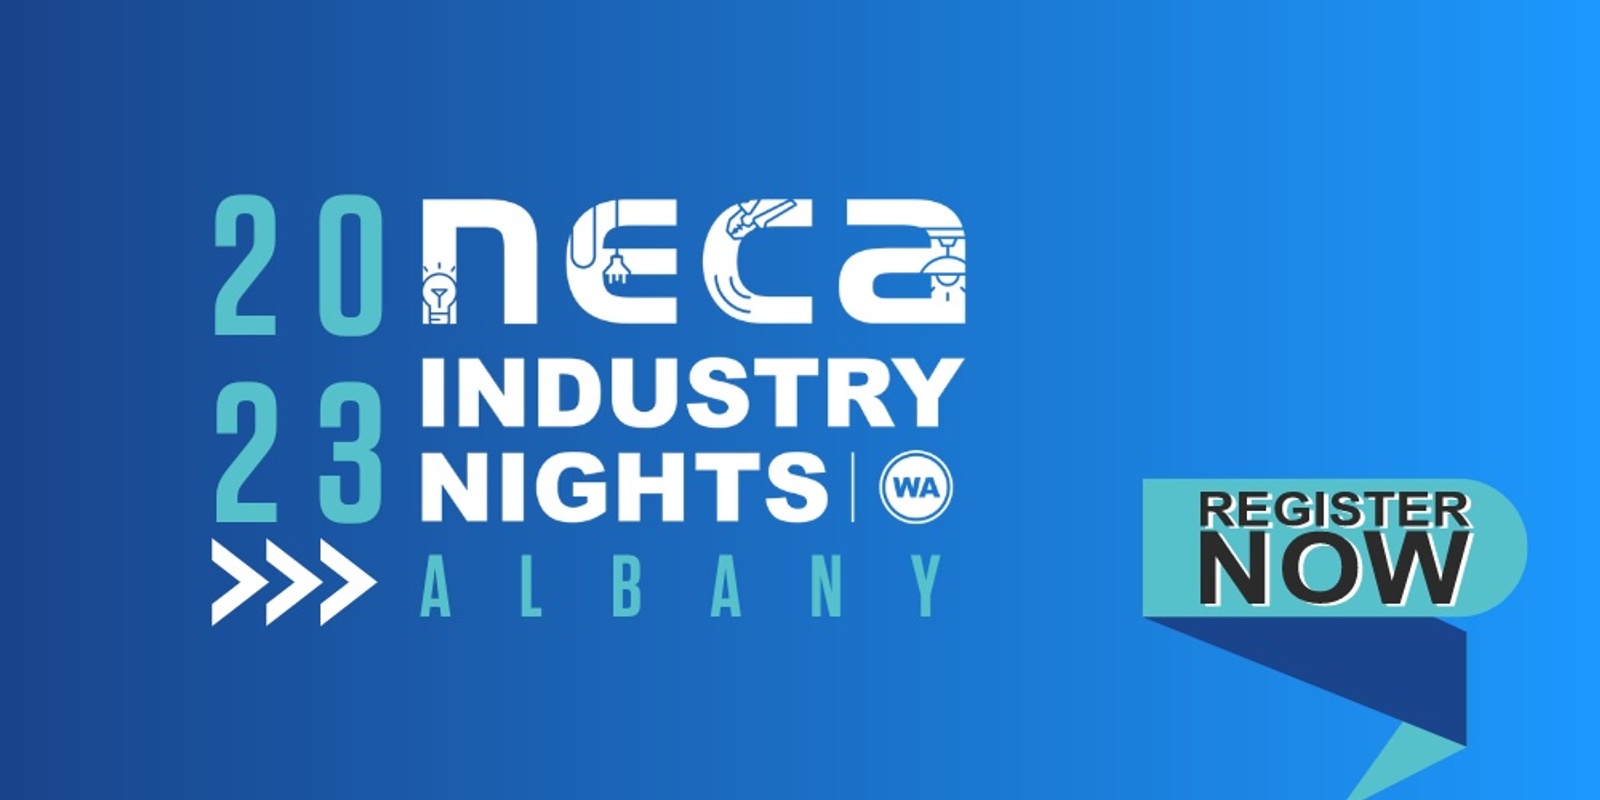 Banner image for 2023 NECA WA Industry Night - Albany